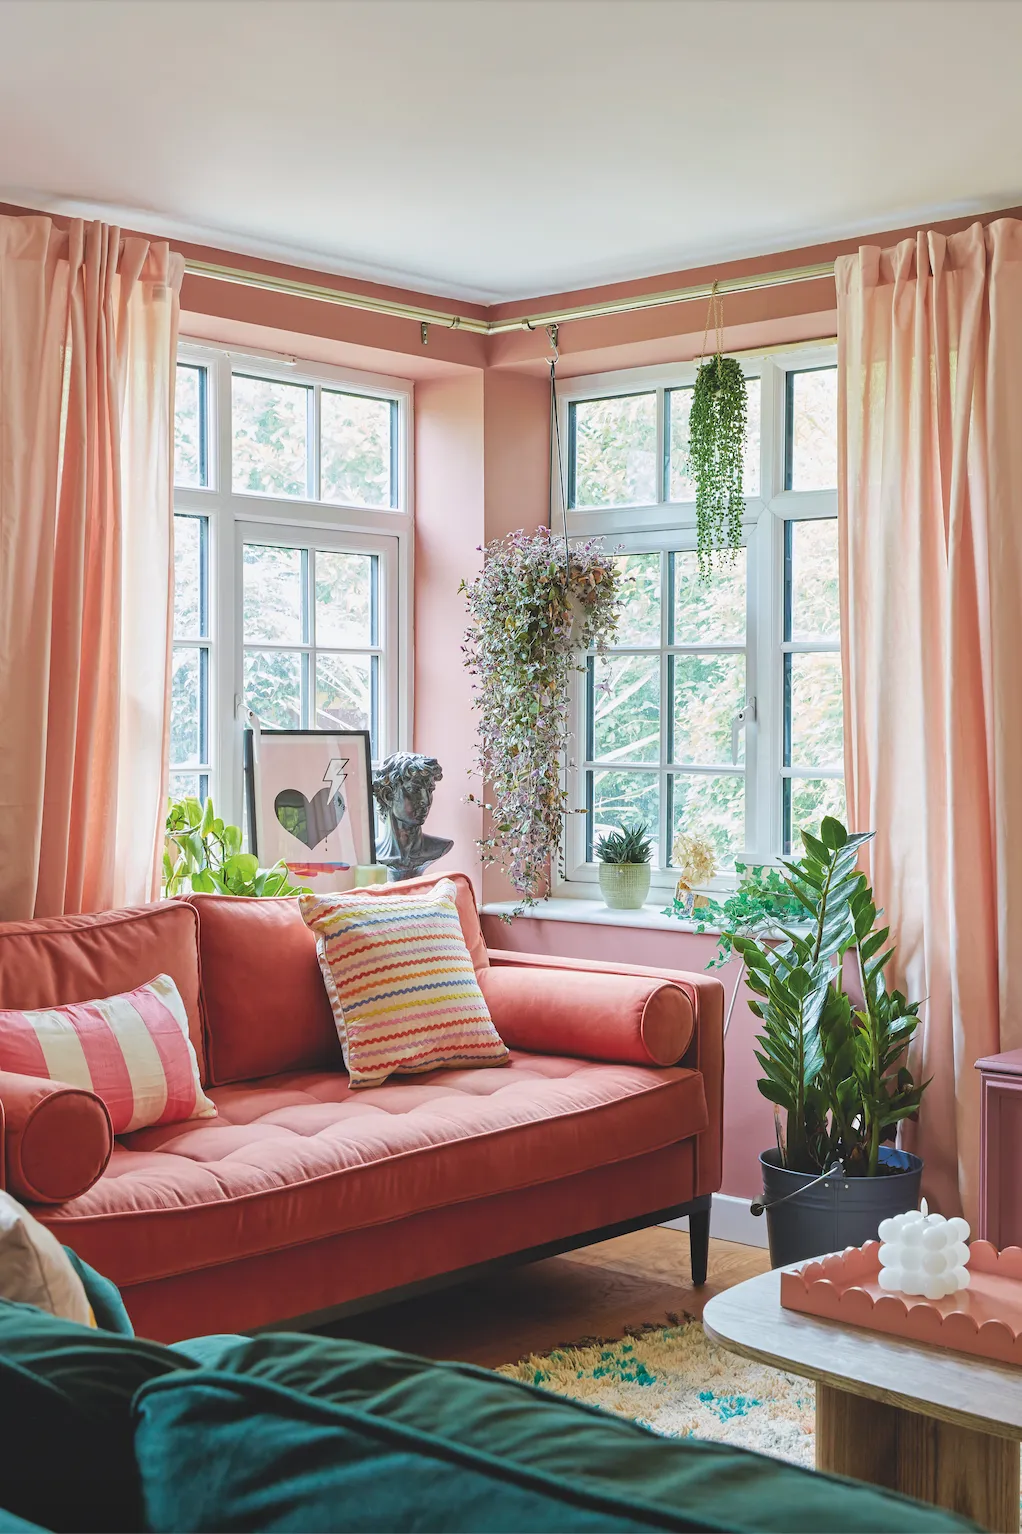 Walls painted in Ashes of Roses by Little Greene are complemented by blush-coloured curtains and a salmon pink sofa from Swyft